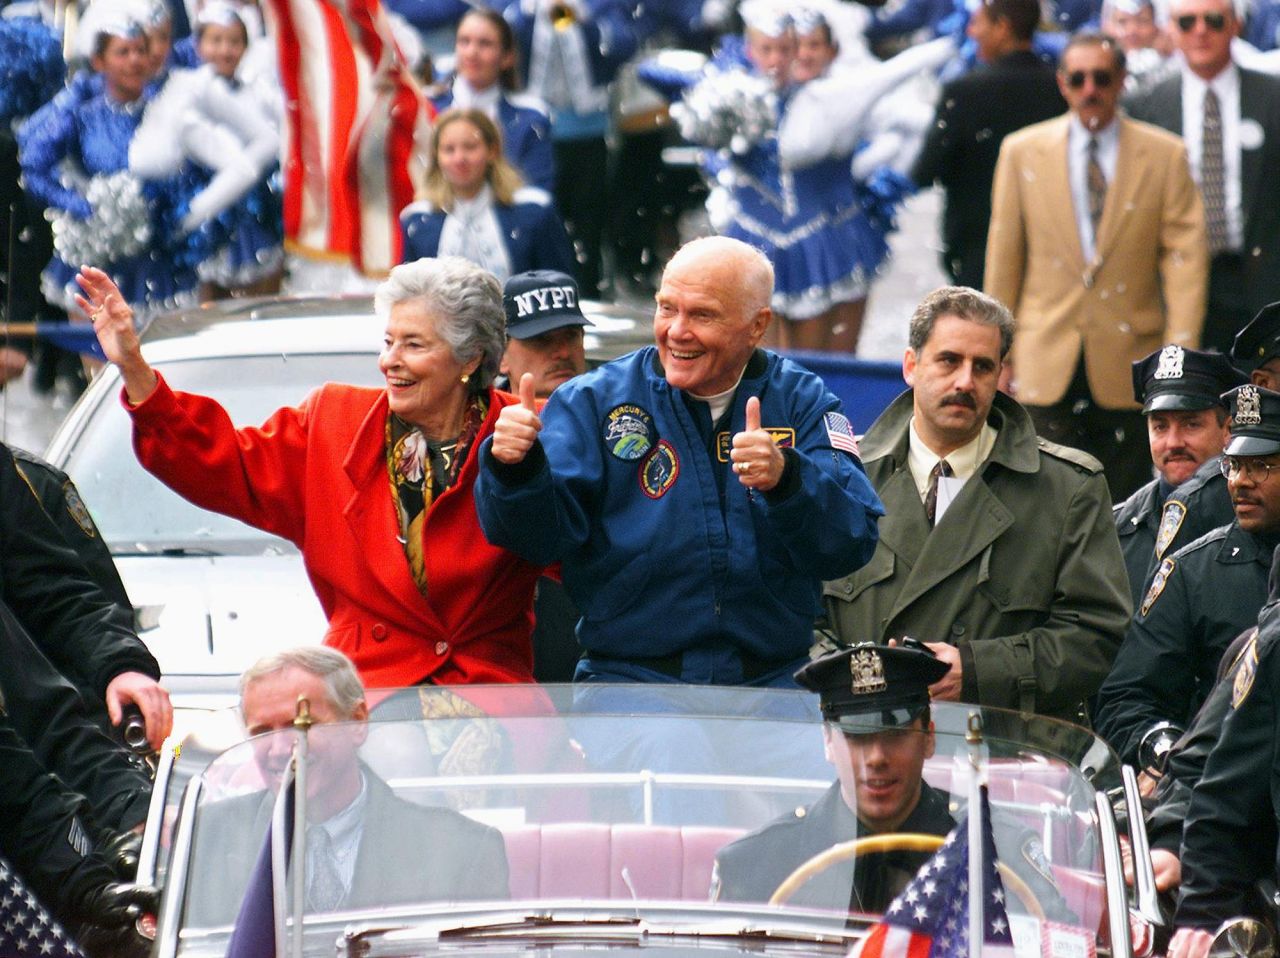 <a href="https://www.cnn.com/2020/05/19/us/annie-glenn-death-coronavirus-trnd/index.html" target="_blank">Annie Glenn</a>, a lifelong advocate for those with speech impediments and wife of the late astronaut John Glenn, died of complications from Covid-19 on May 19. She was 100.